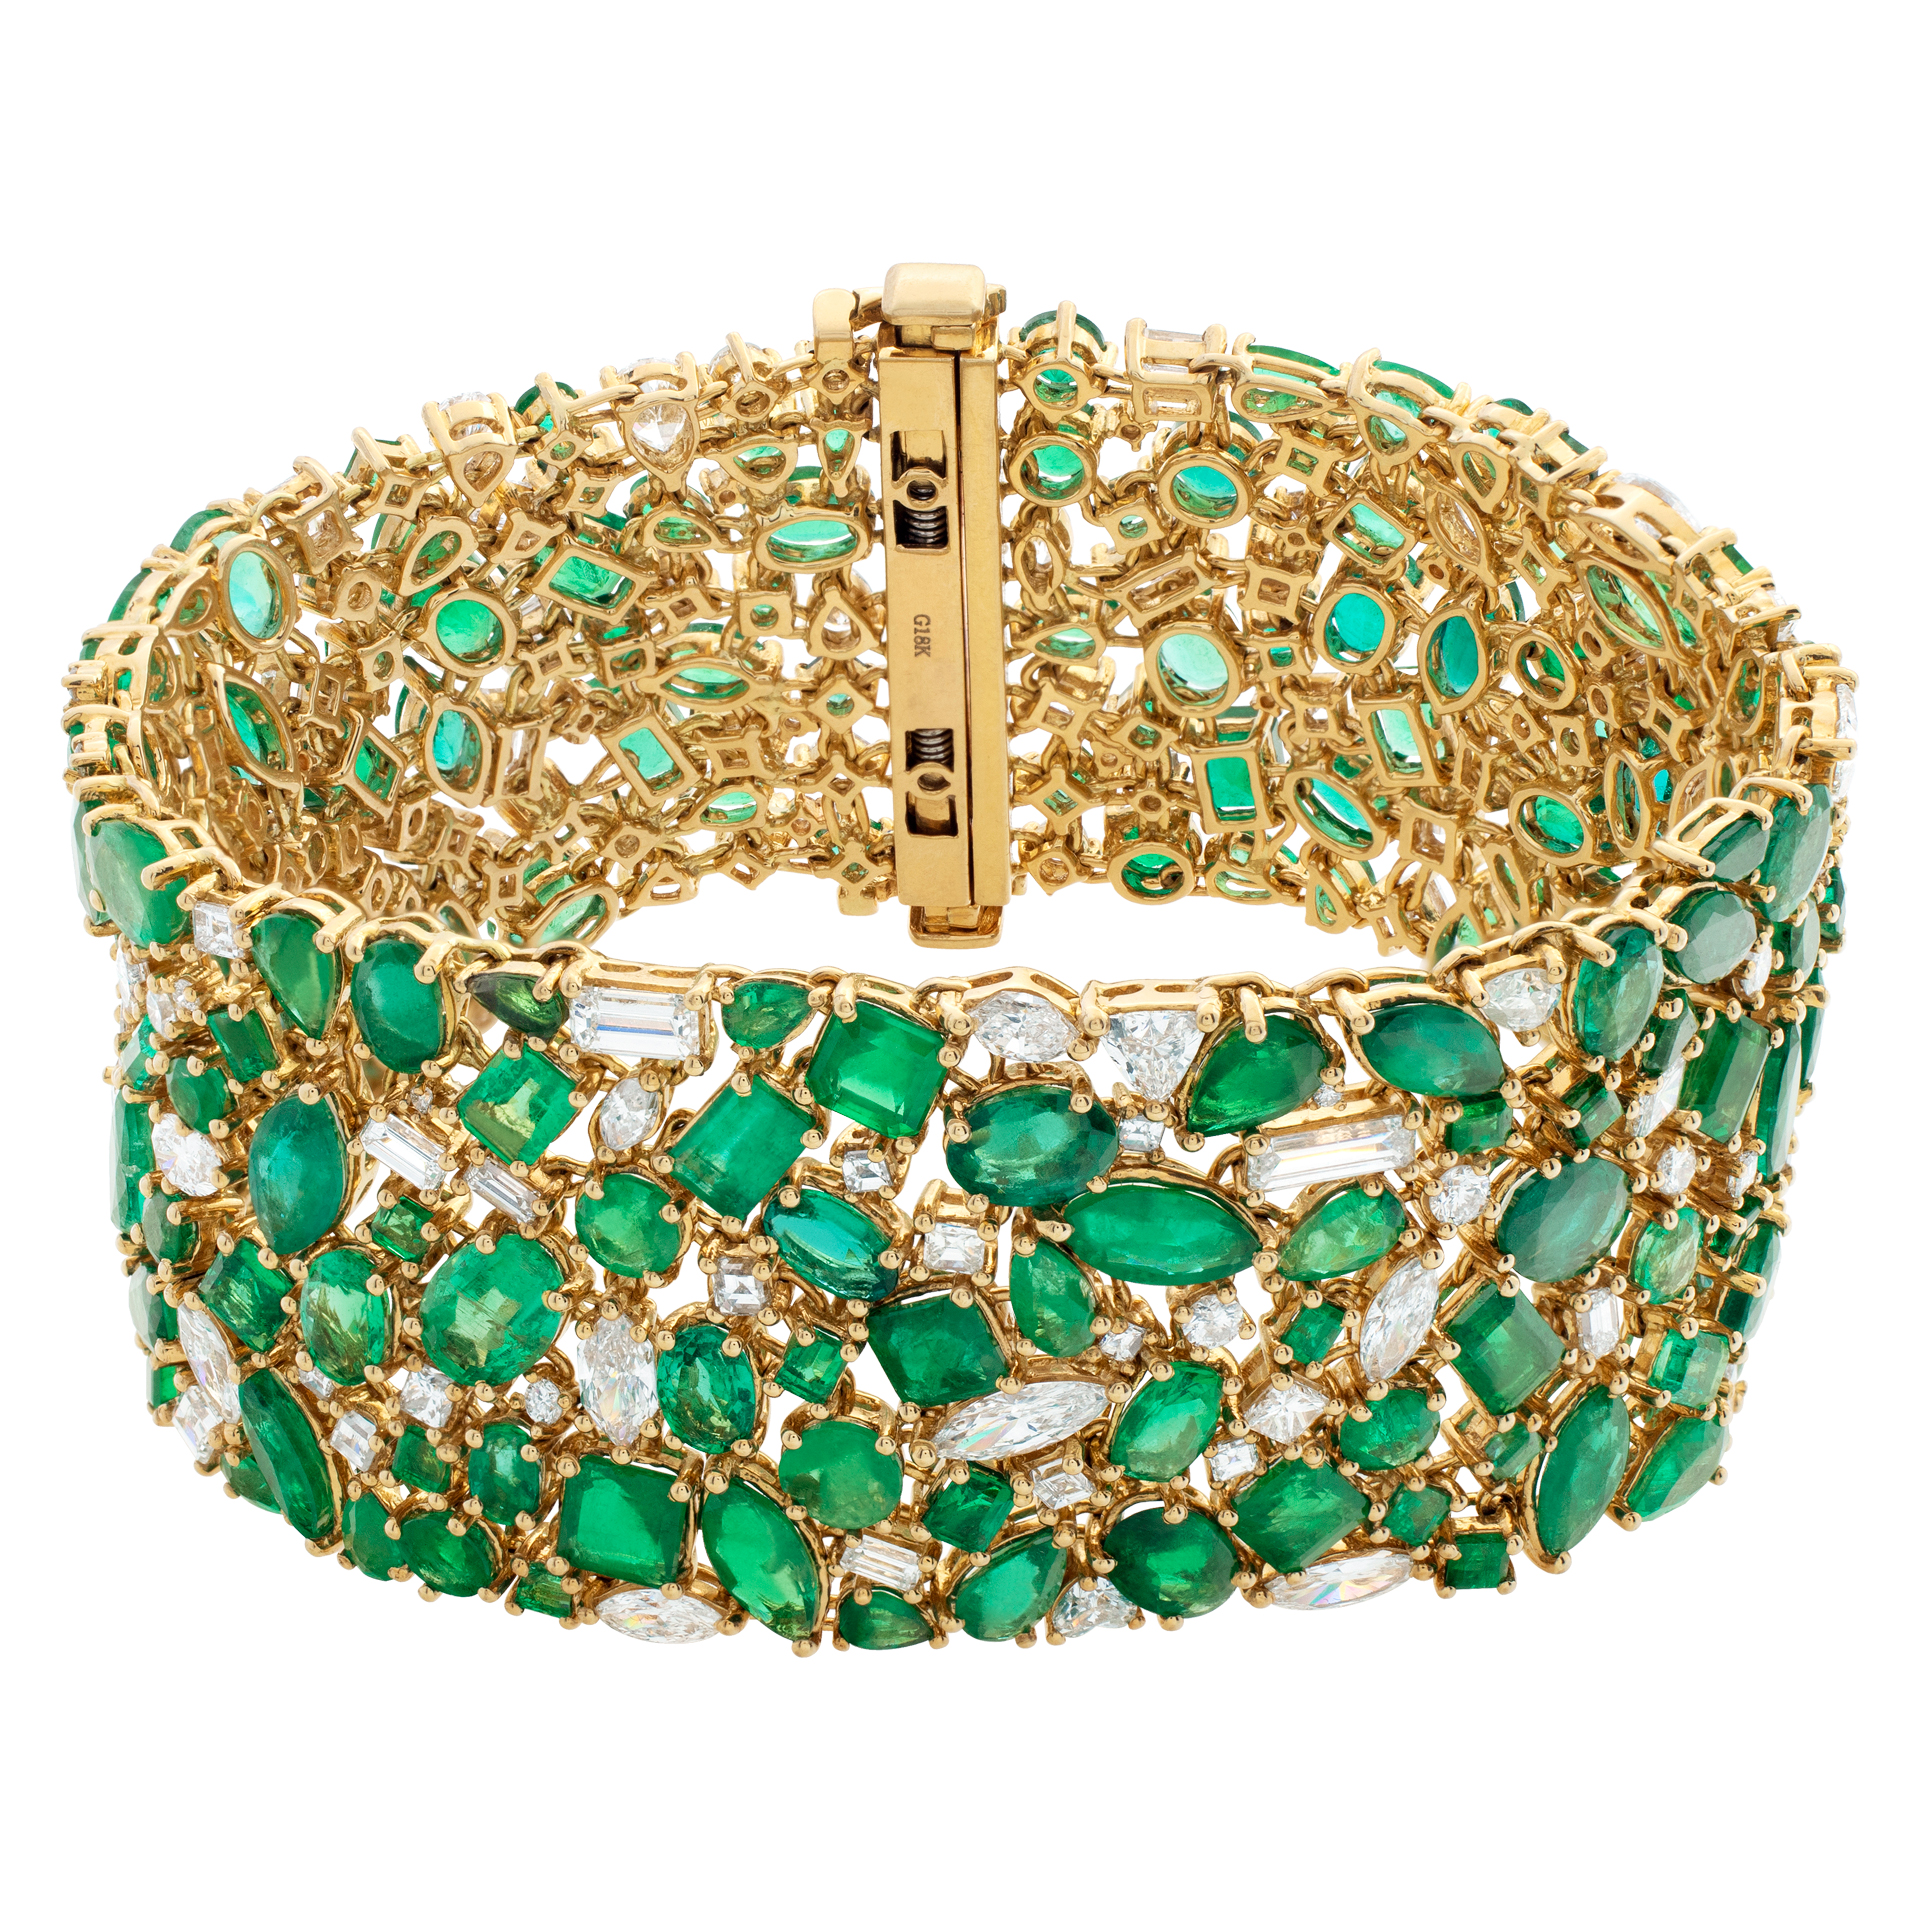 Colombian emerald and diamond bracelet set in 18k yellow gold